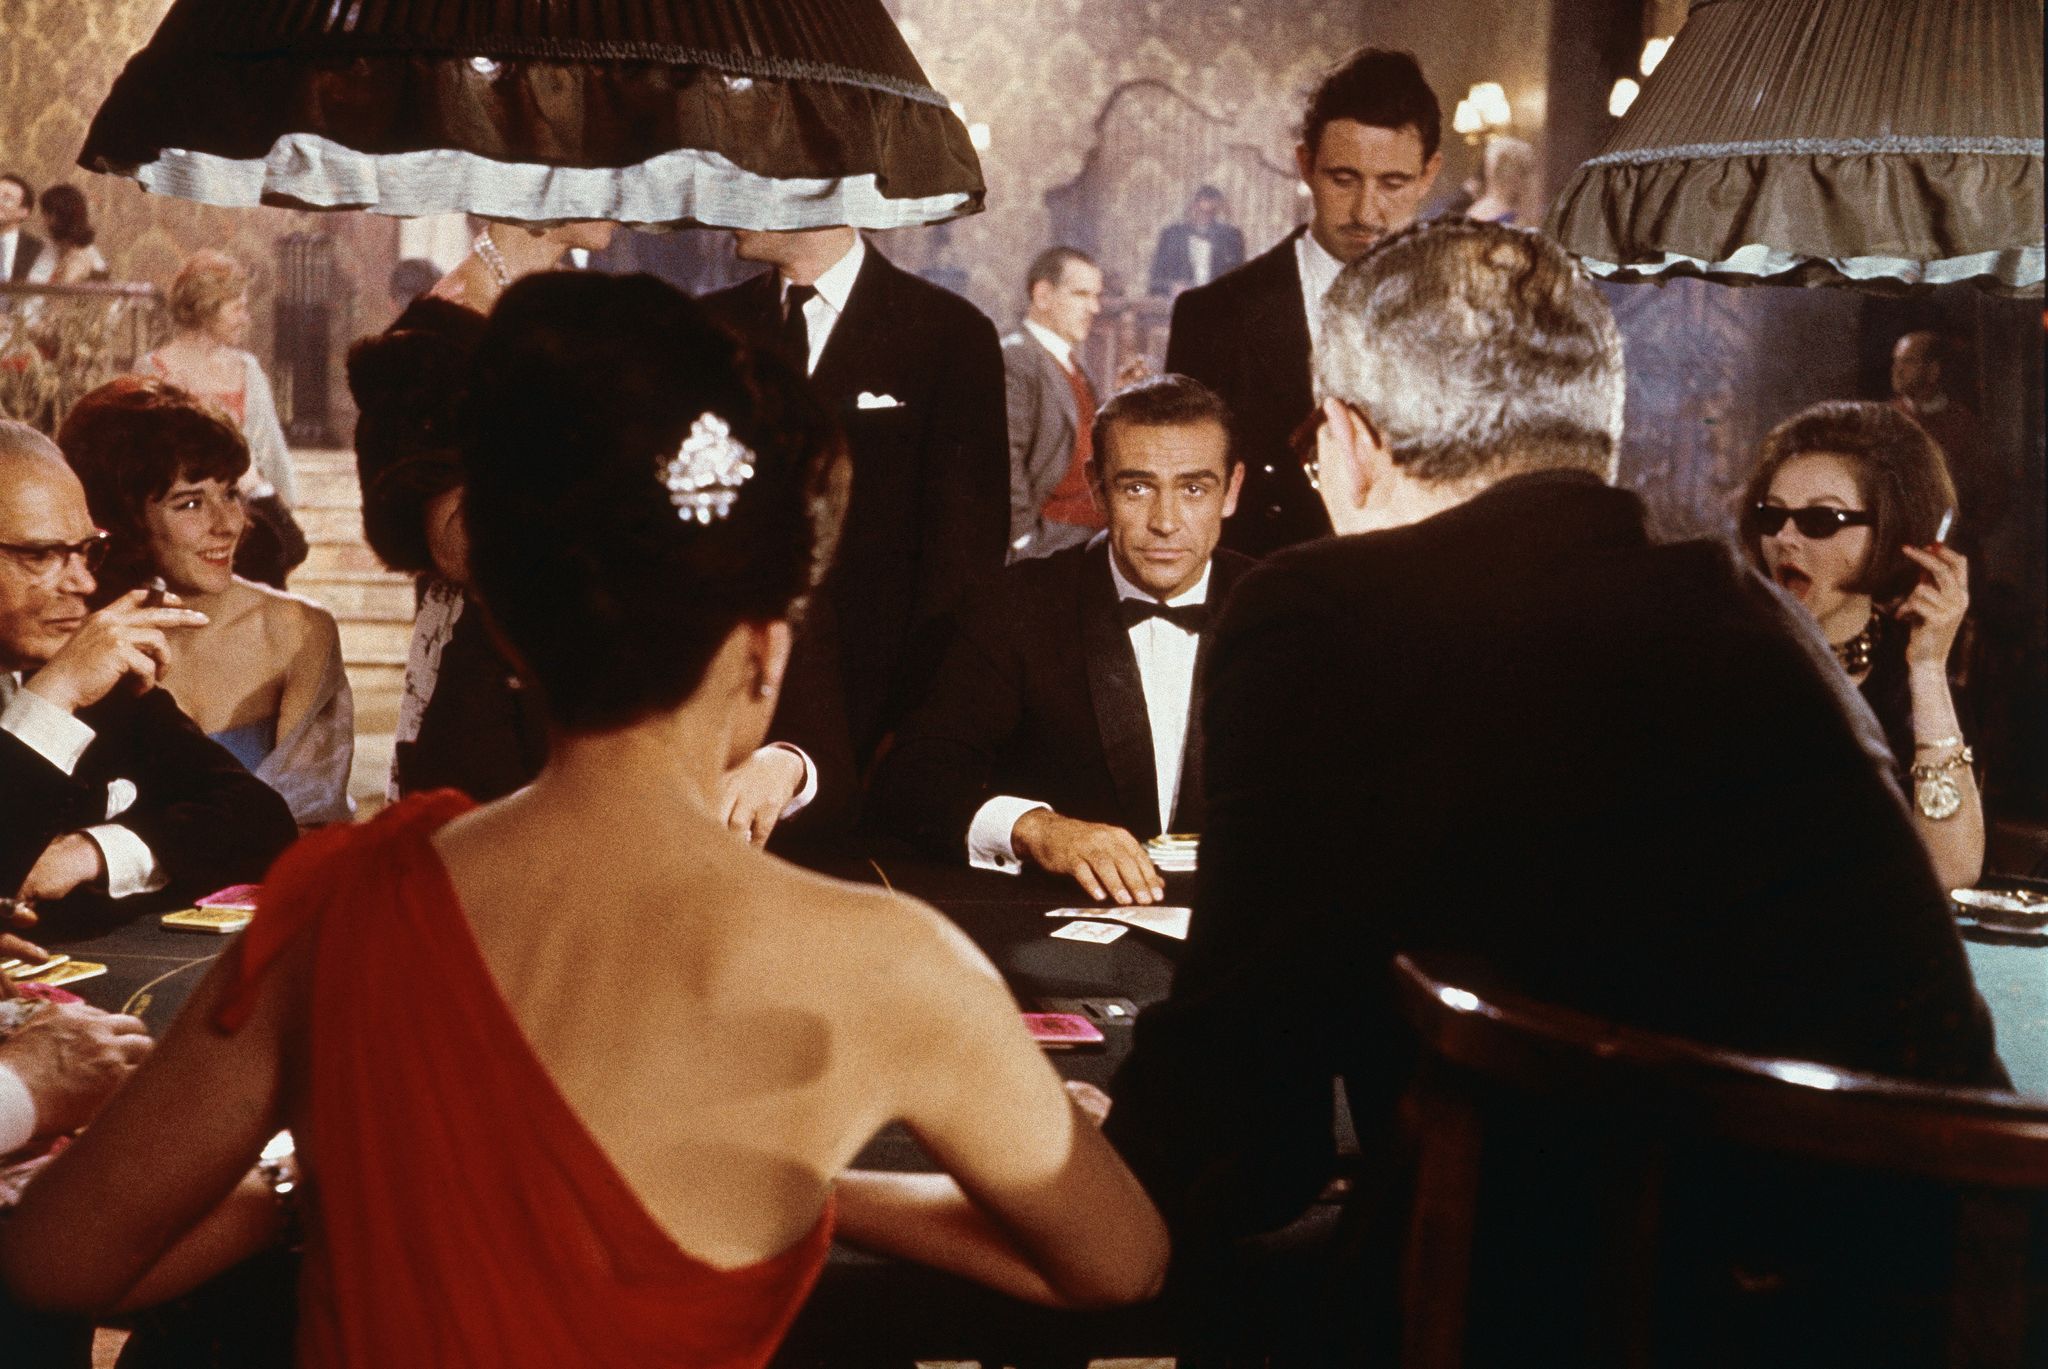 scottish actor sean connery center as fictional secret agent james bond sits at a casino card table in a scene from the film dr no, directed by terence young, 1962 british actress eunice gayson sits with her back to the camera in a red, off the shoulder dress photo by mgm studioscourtesy of getty images